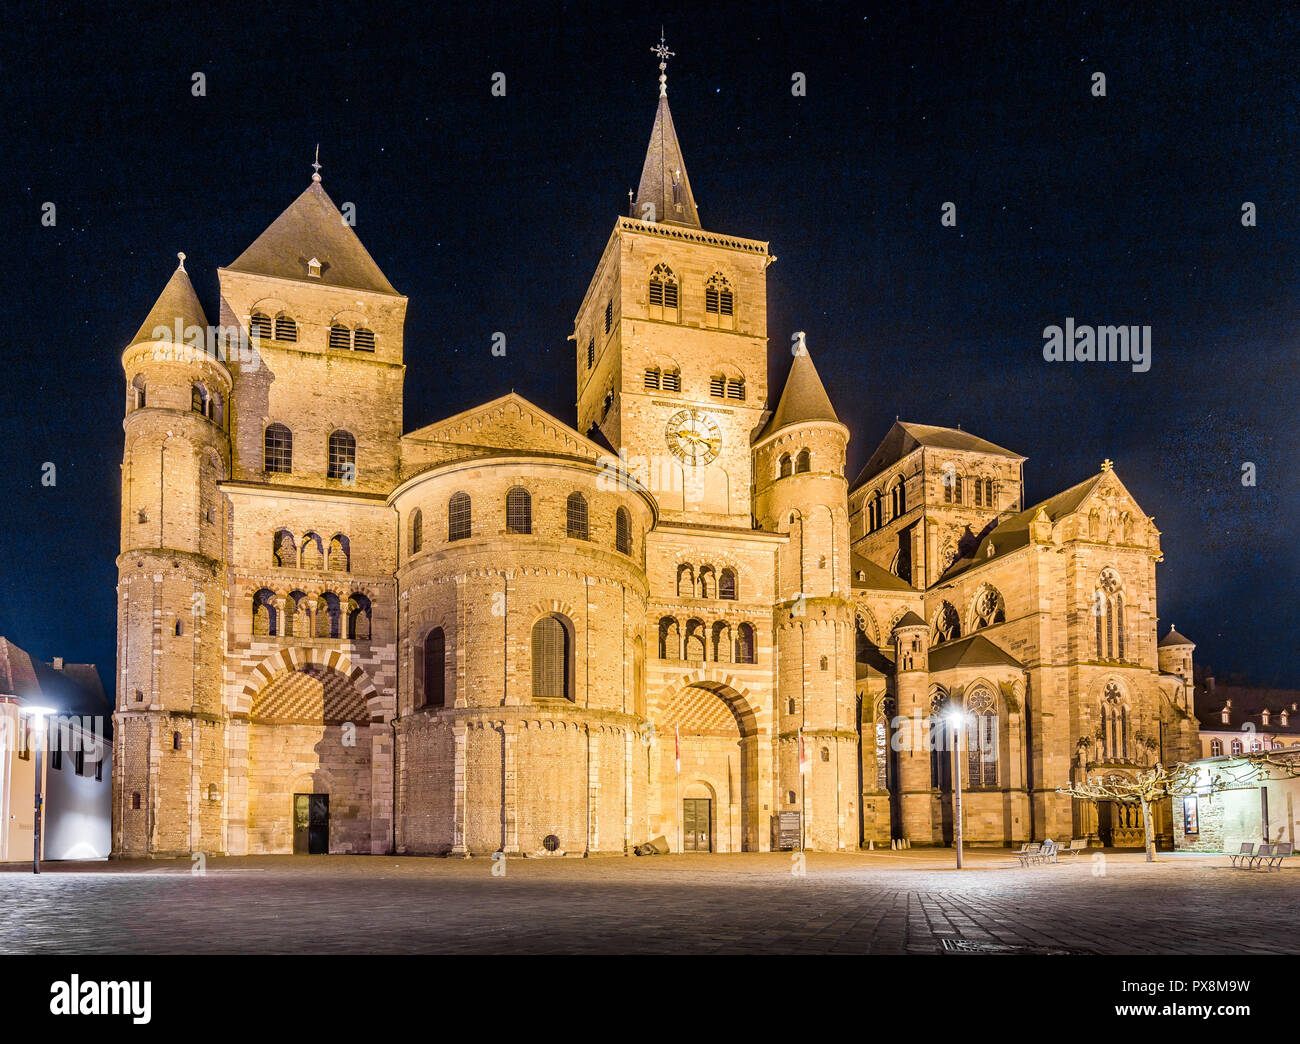 Beautiful view of famous Trierer Dom (High Cathedral of Trier) illuminated at night, Trier, Germany Stock Photo